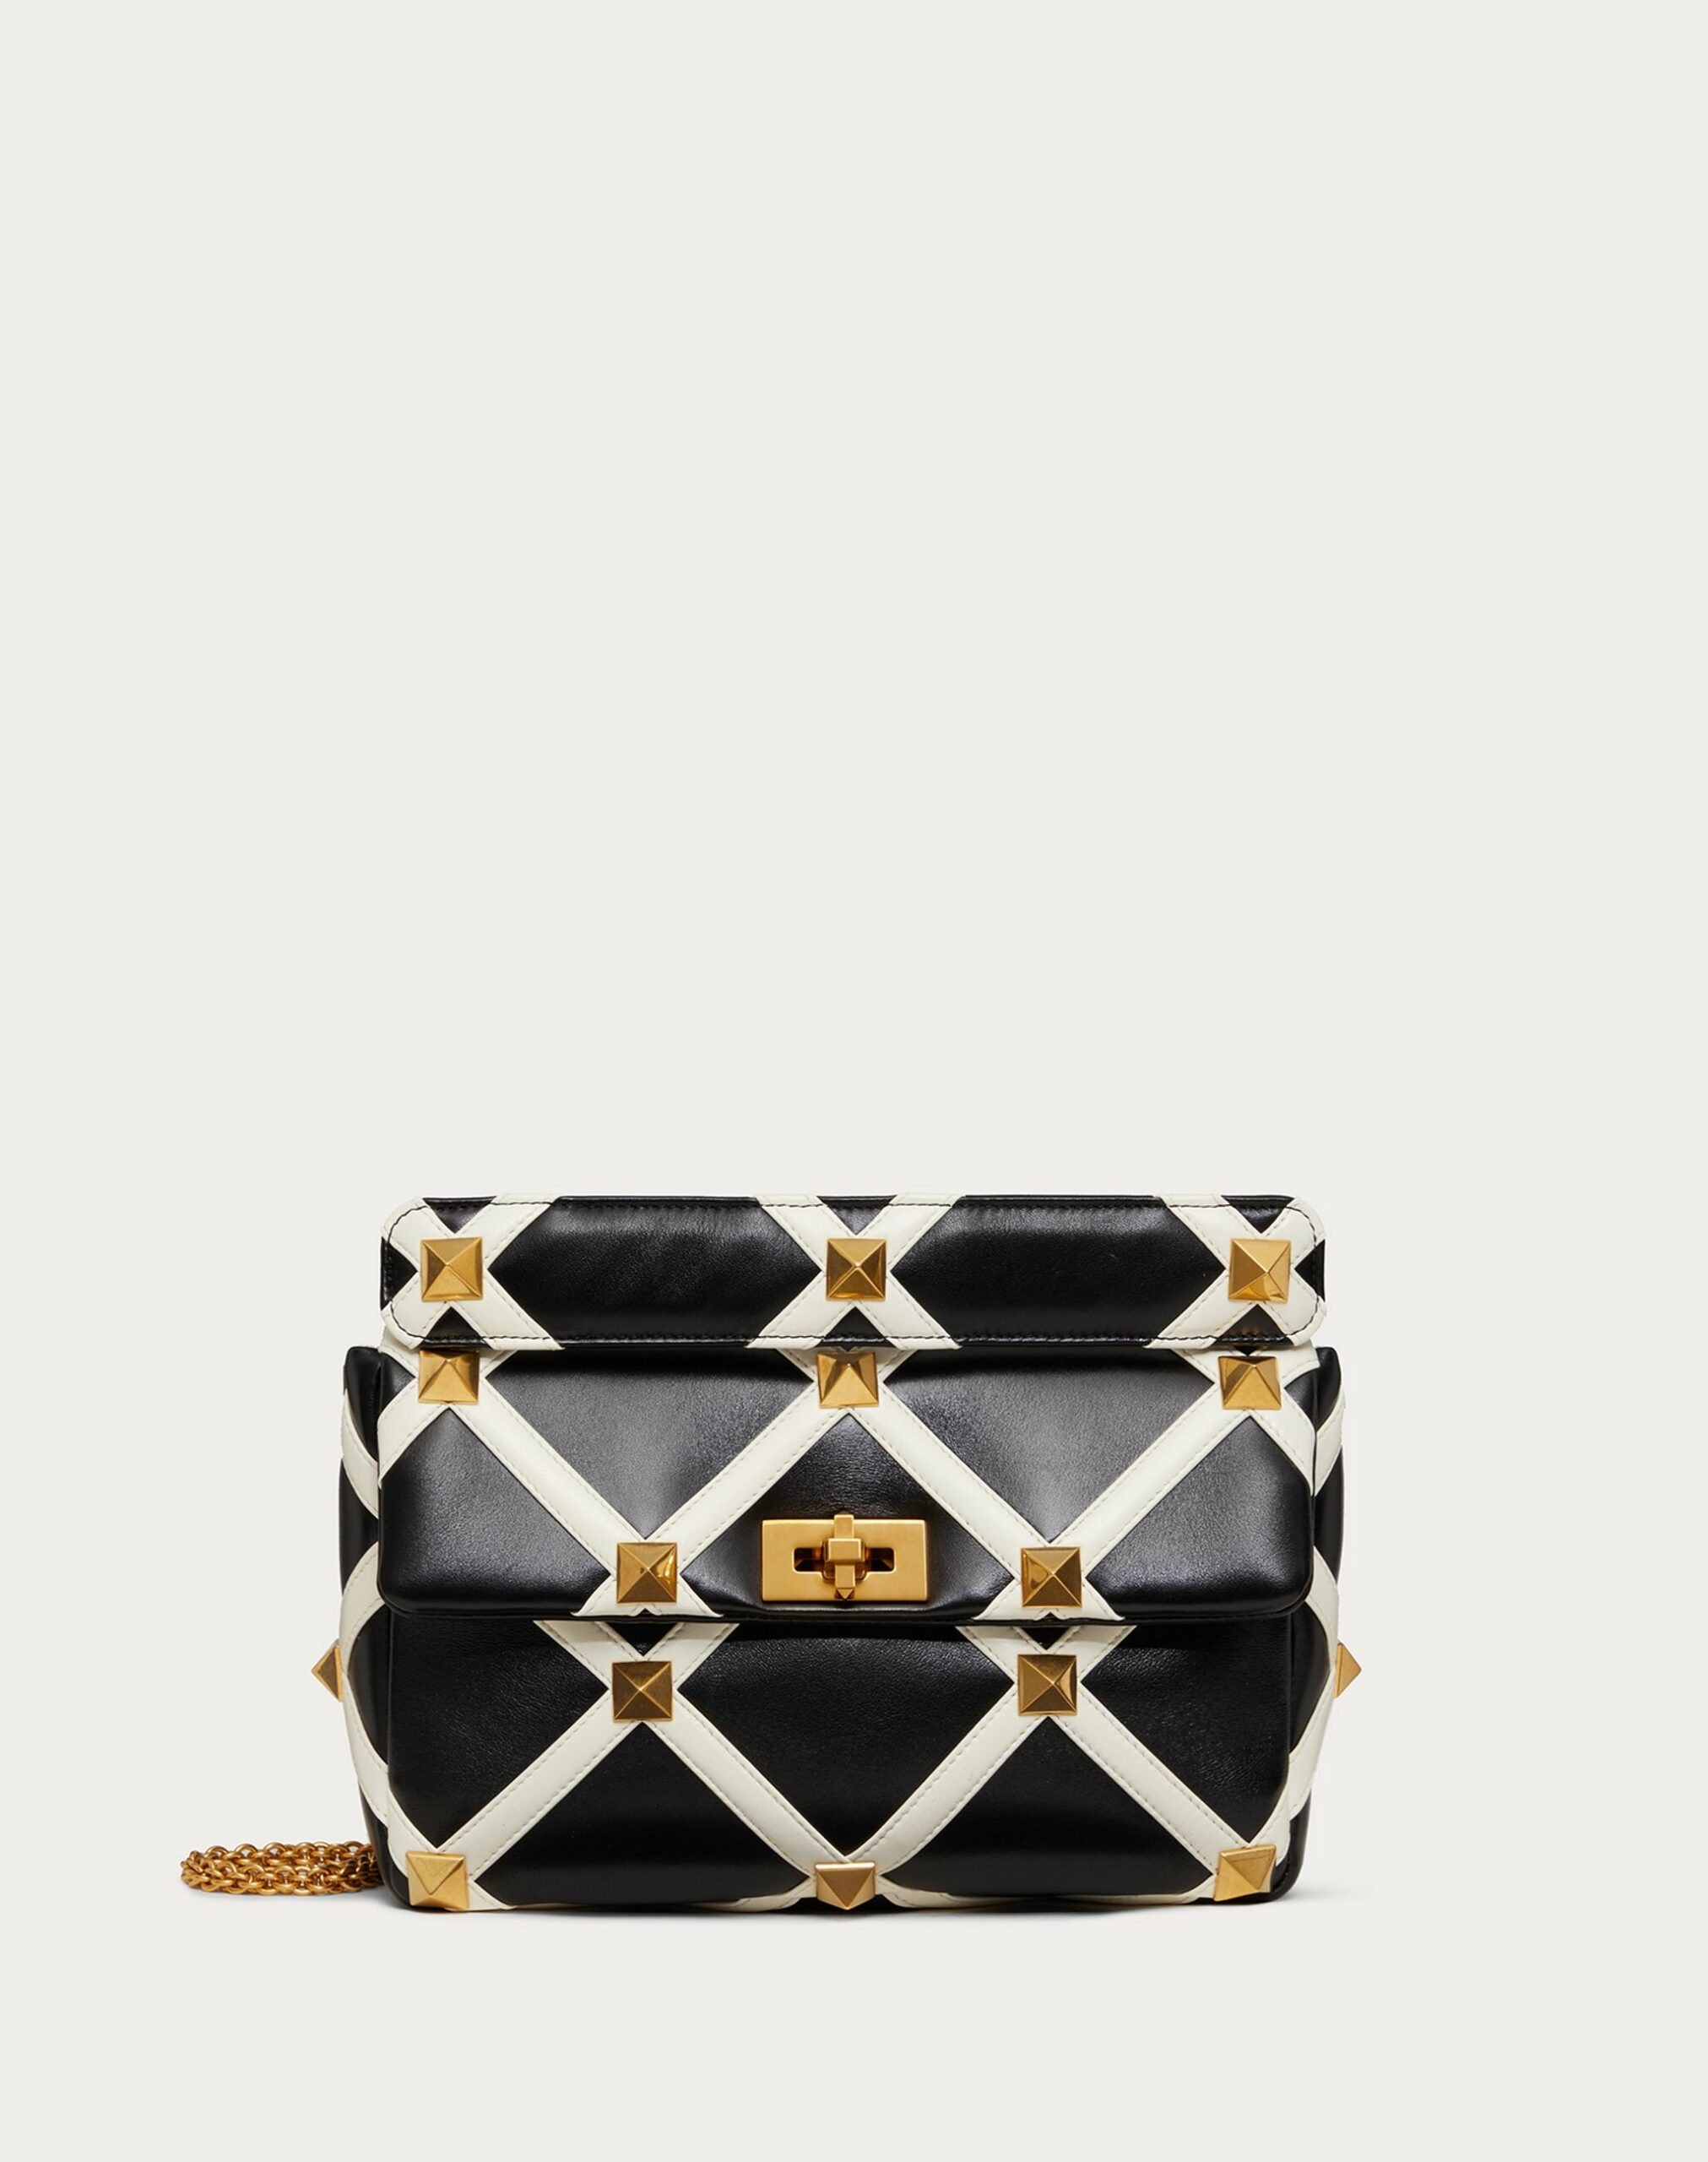 Valentino Large Roman Stud The Shoulder Bag In Nappa With Grid Detailing Black/ivory (WW0B0I60ZDF790)